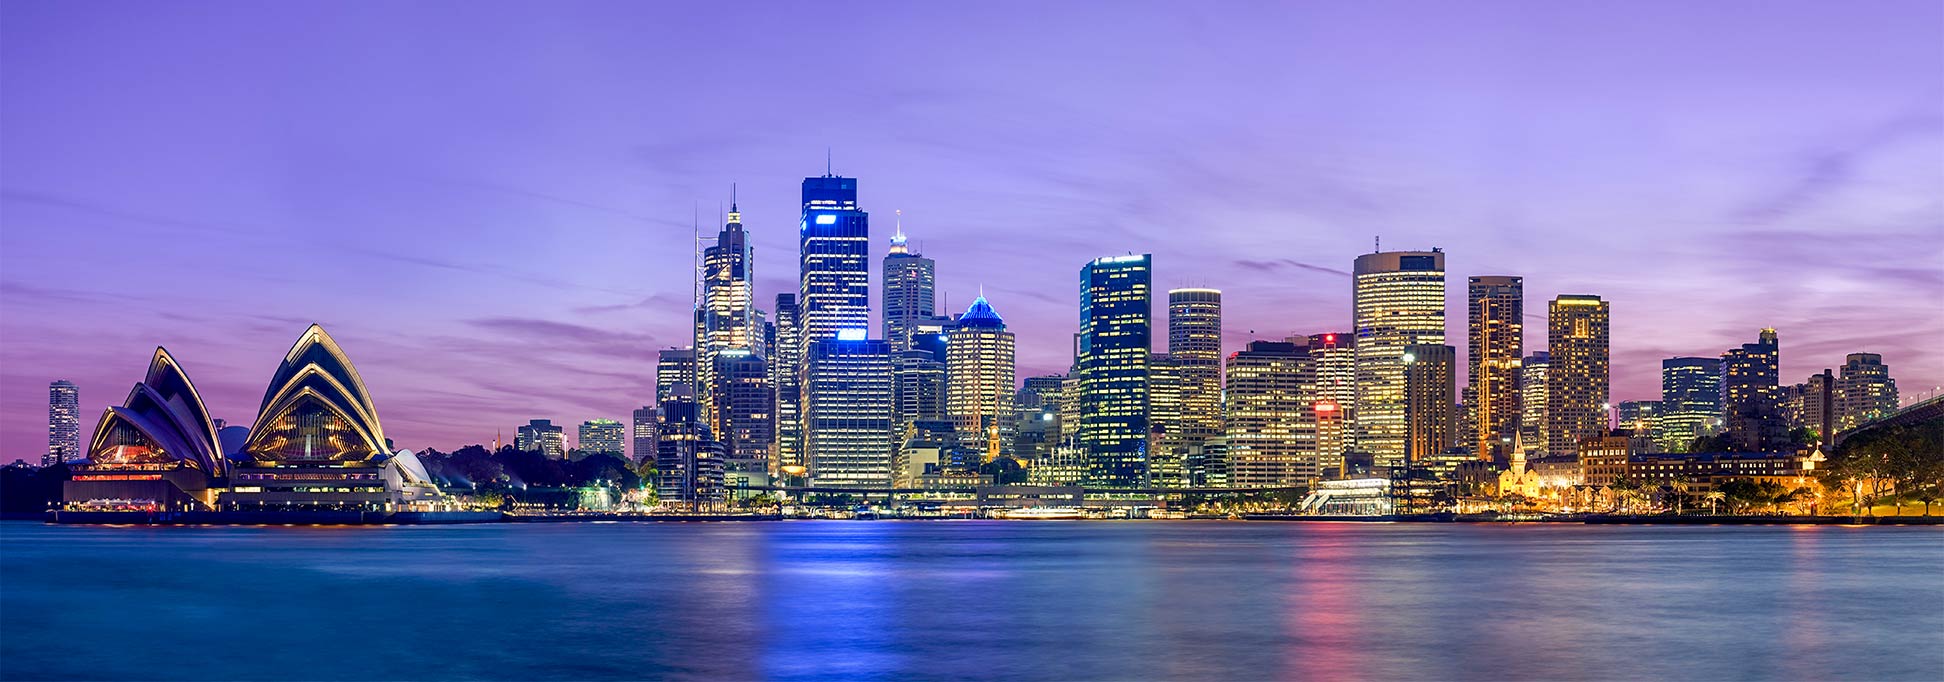 Panoramic view of the Sydney skyline seen across Sydney Harbour from Kirribilli